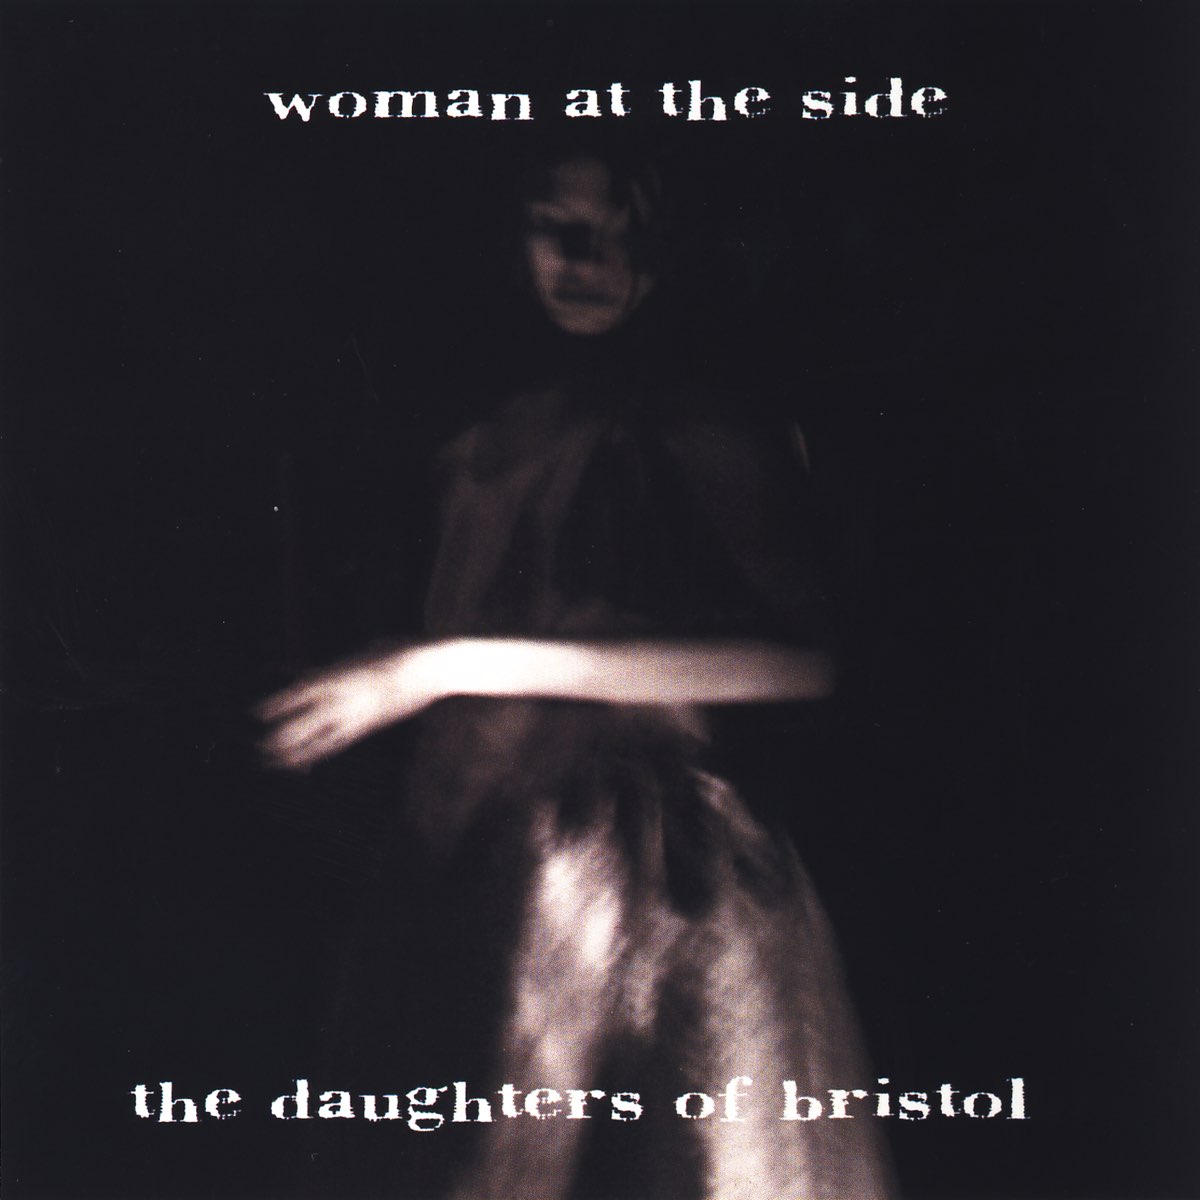 The daughters of eve. The daughters of Bristol.